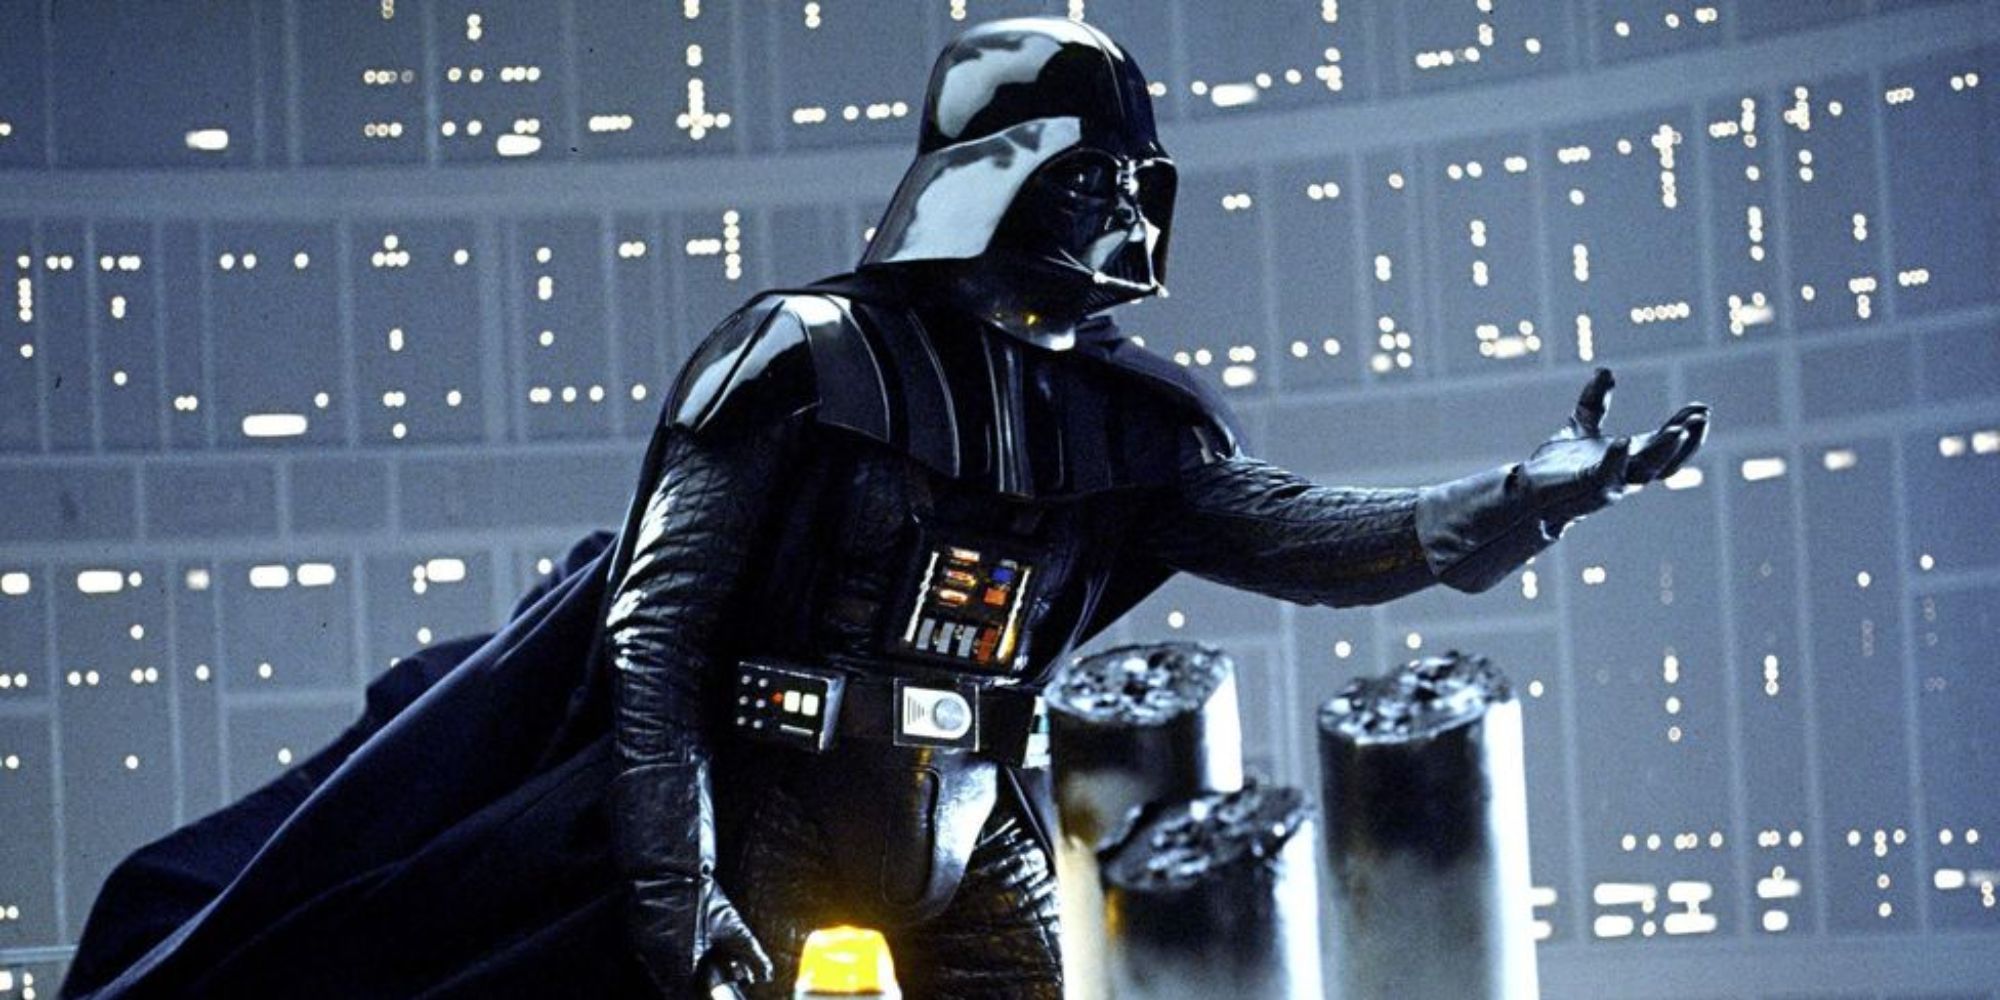 Darth Vader holds out his hand